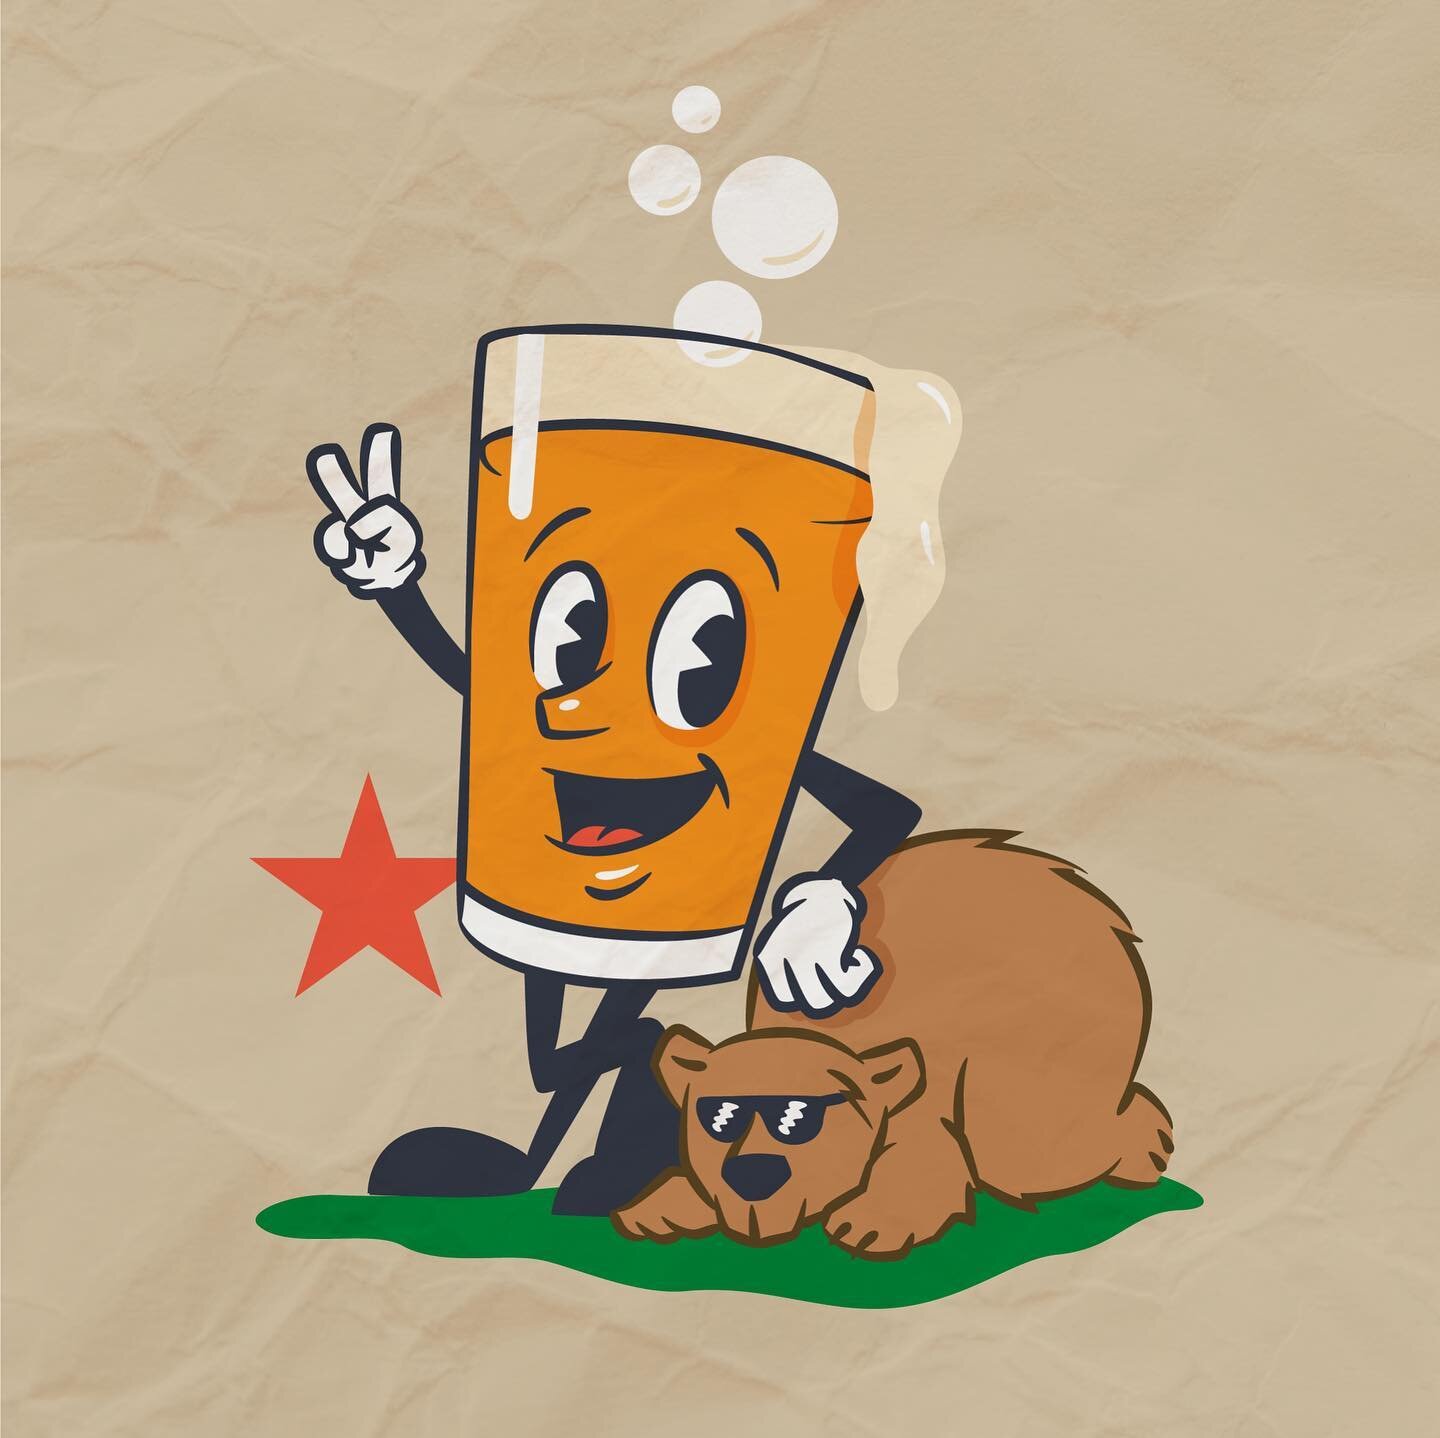 New mascot for @opentapapp apparel and stickers 🍻🐻 #staychill #california #craftbeer